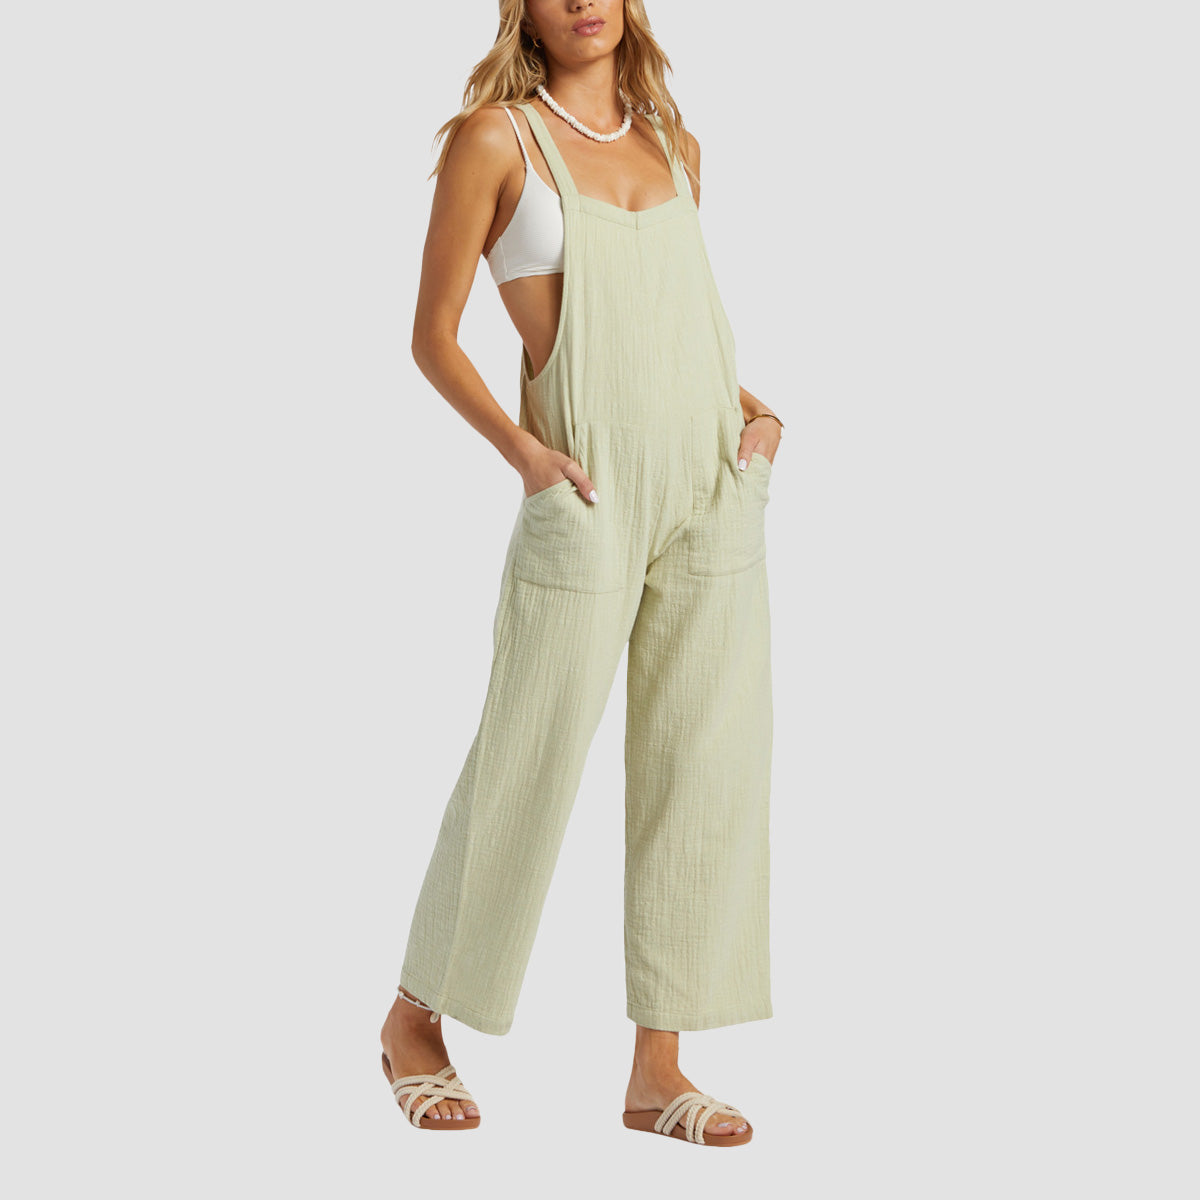 Billabong Pacific Time Strappy Jumpsuit Light Avocado - Womens